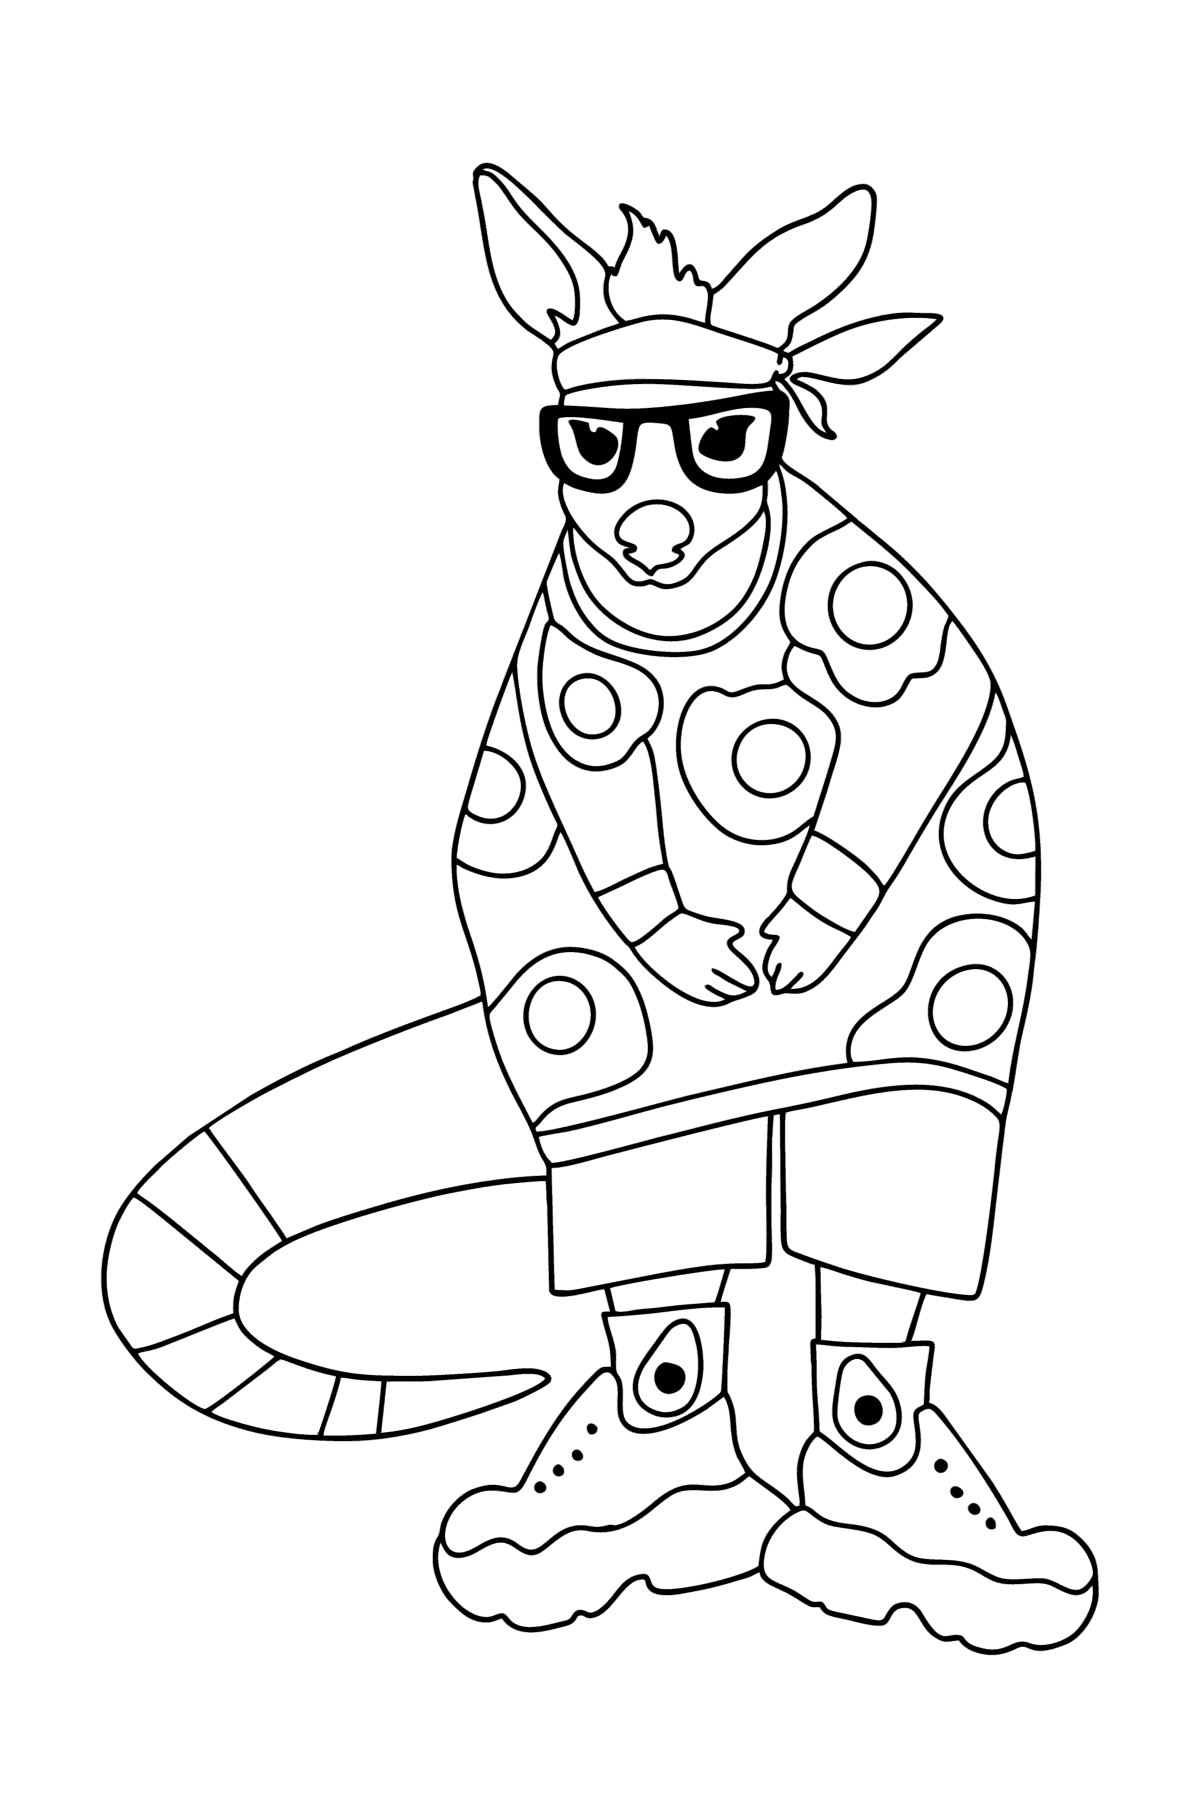 Cartoon Kangaroo coloring page - Coloring Pages for Kids